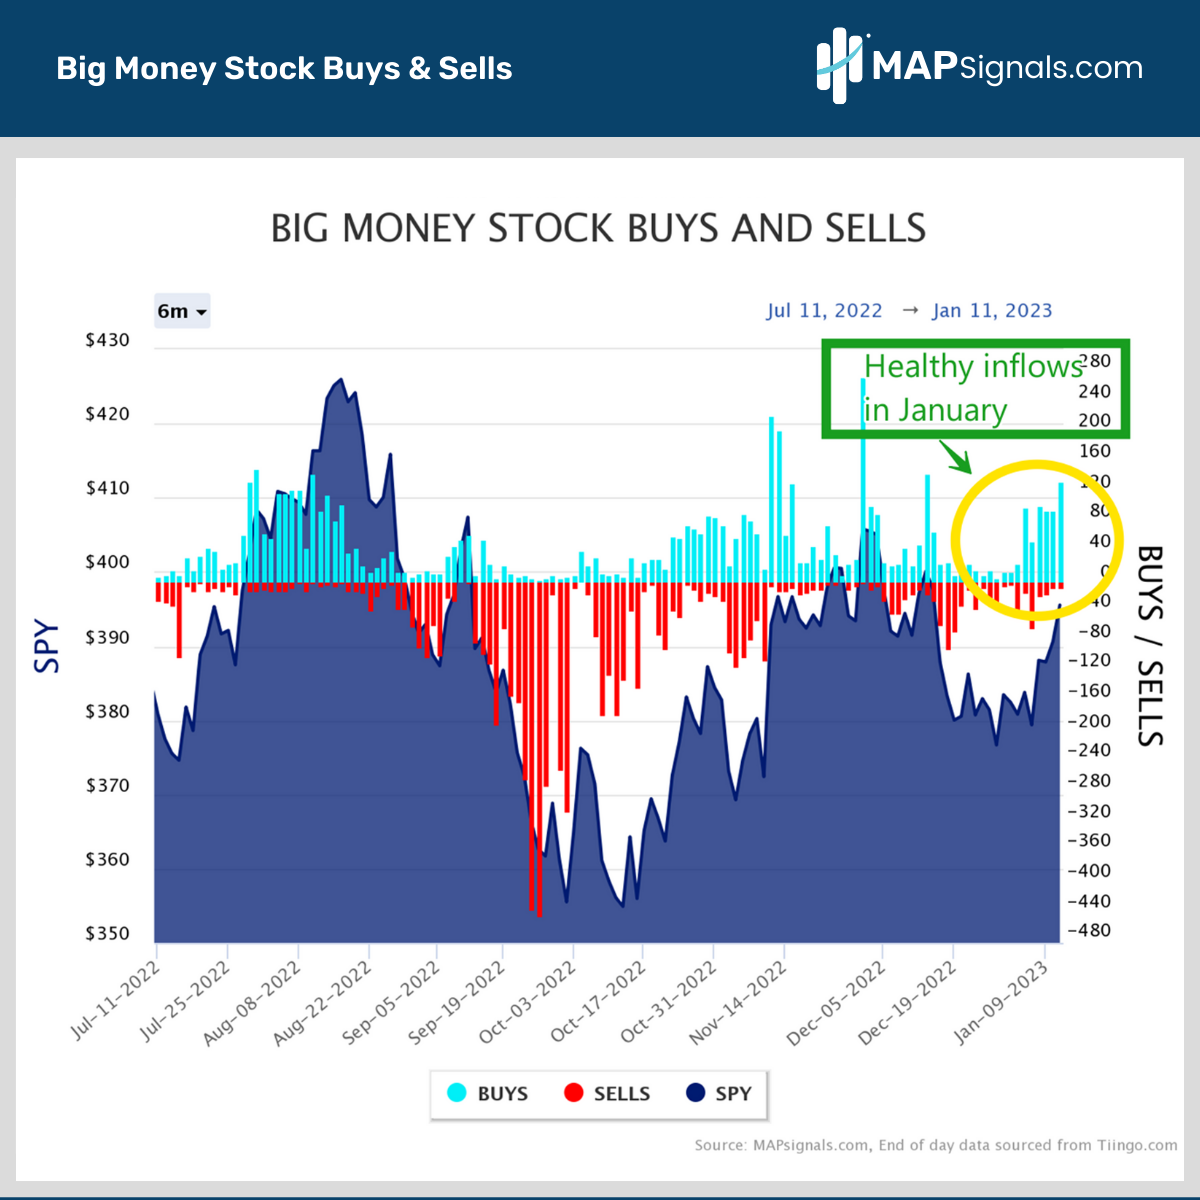 Healthy inflows in January | Big Money Stock Buys & Sells